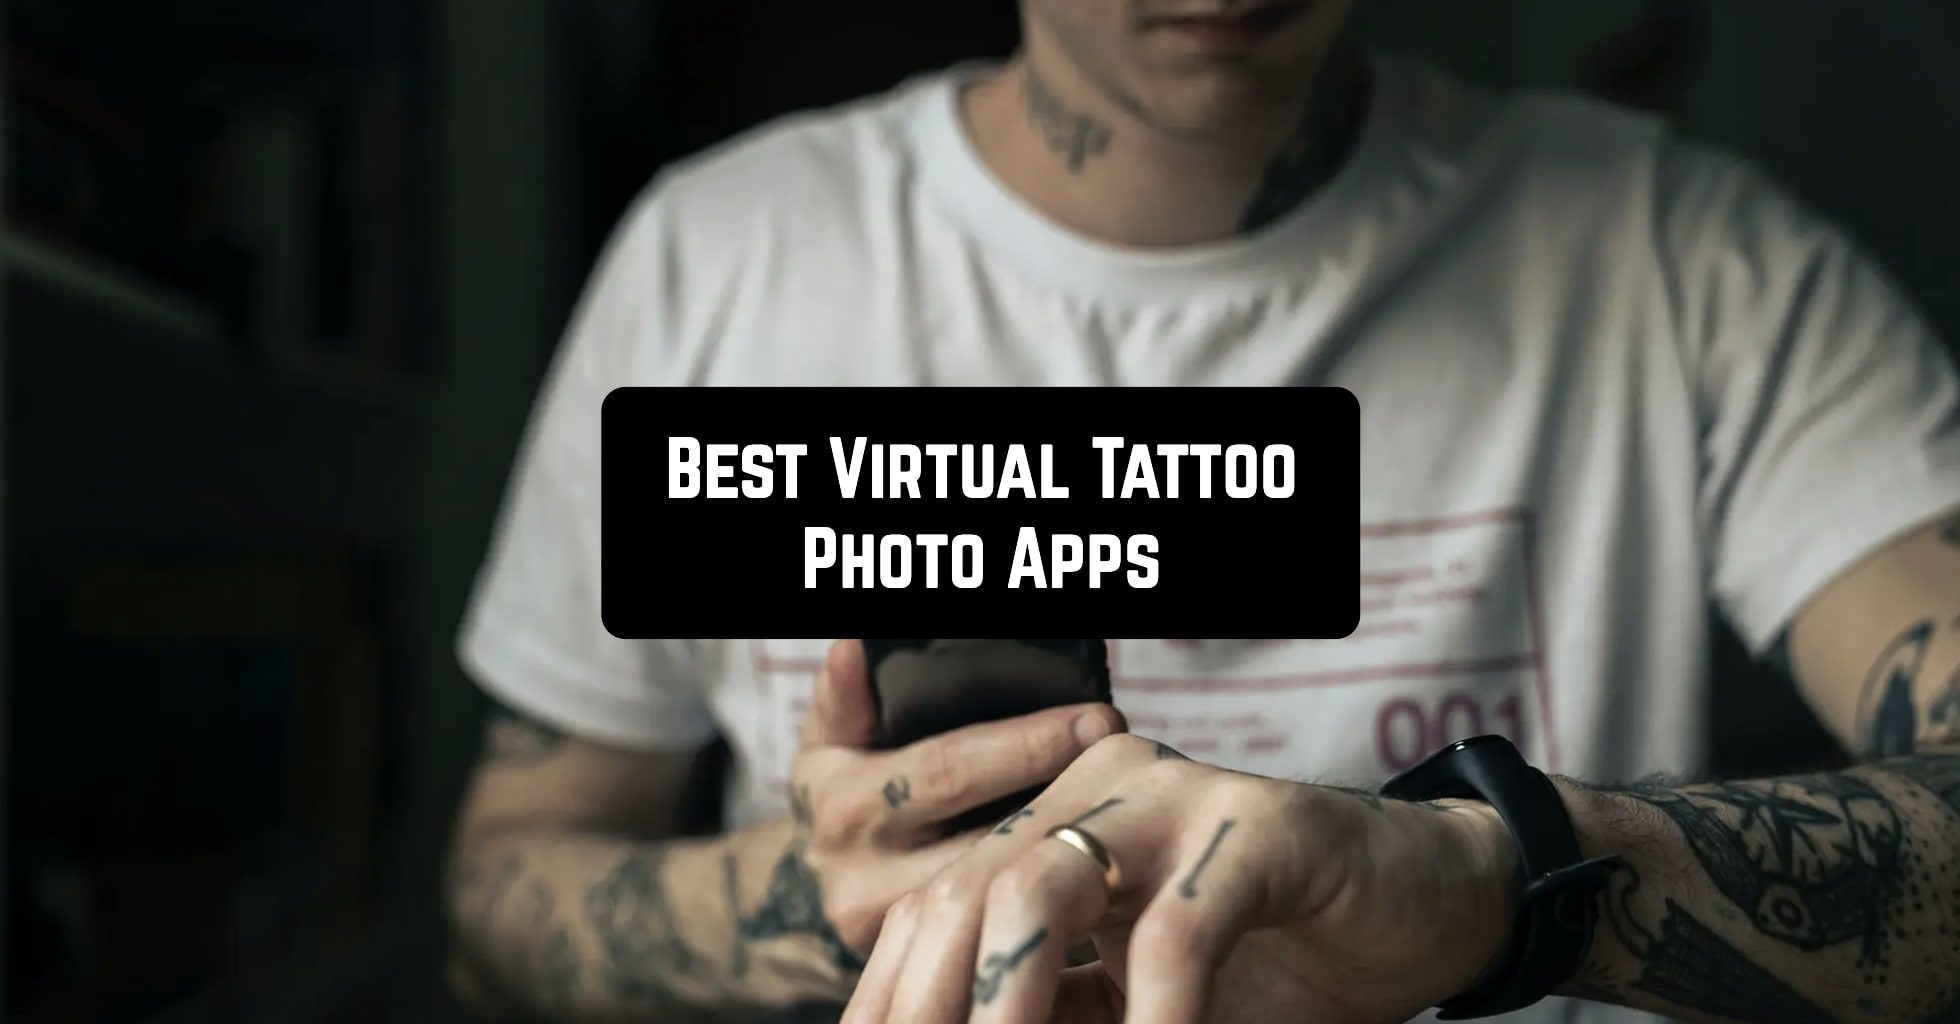 11 Best virtual tattoo photo apps for Android & iOS | Free apps for Android  and iOS